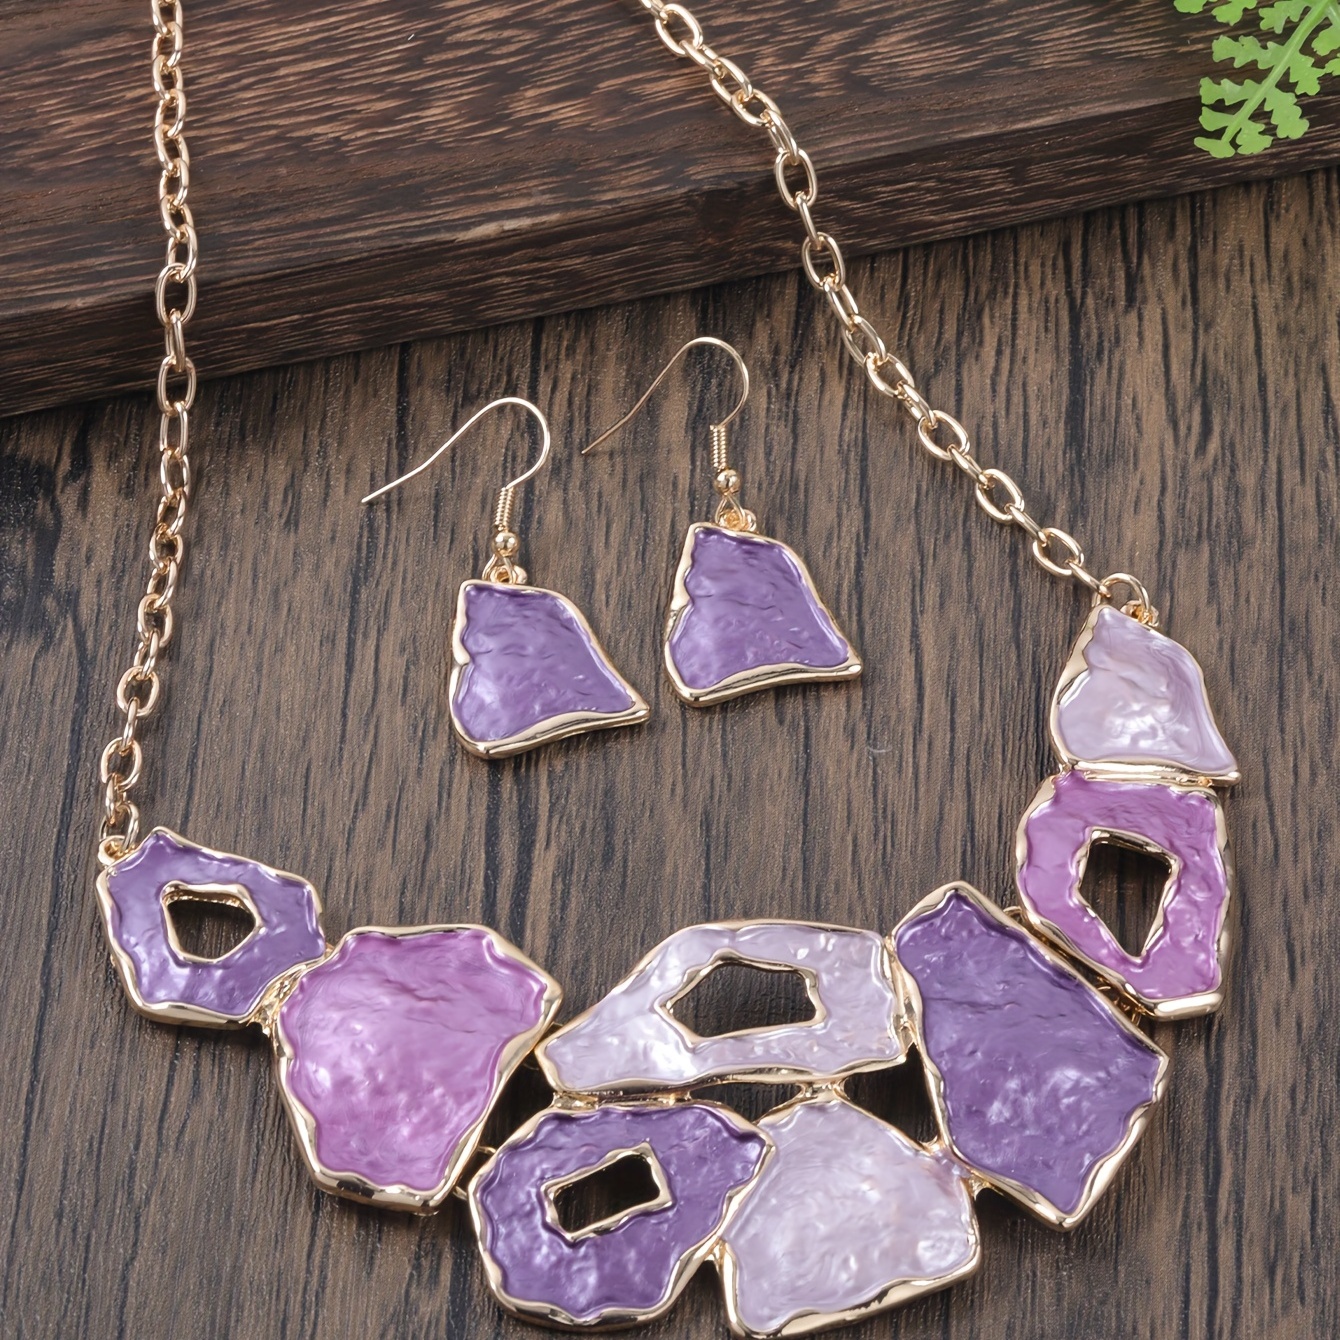 

3pcs Earrings Plus Necklace Boho Style Jewelry Set Zinc Alloy Irregular Design Dainty Purple Color Match Daily Outfits Gift For Her